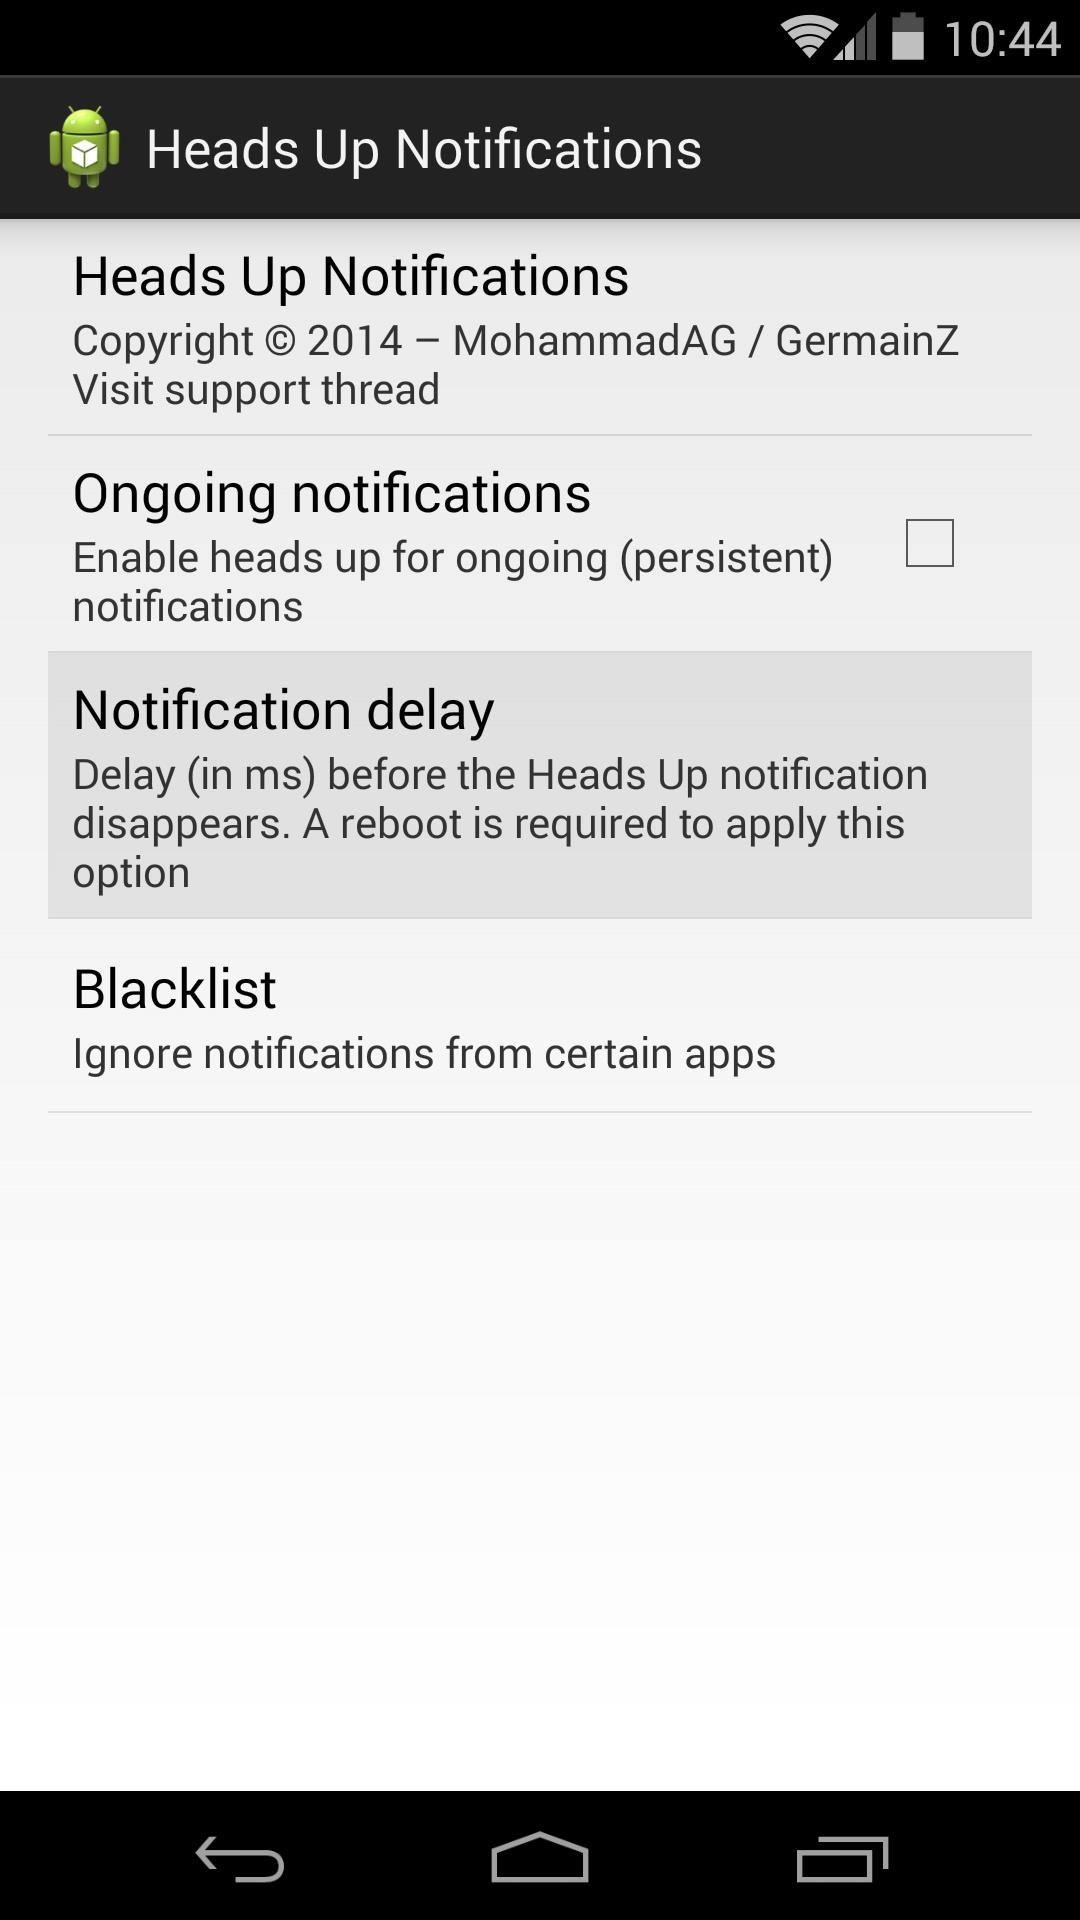 How to Get the New Android L "Heads Up" Notifications on Your Nexus 5 or Other Android Device